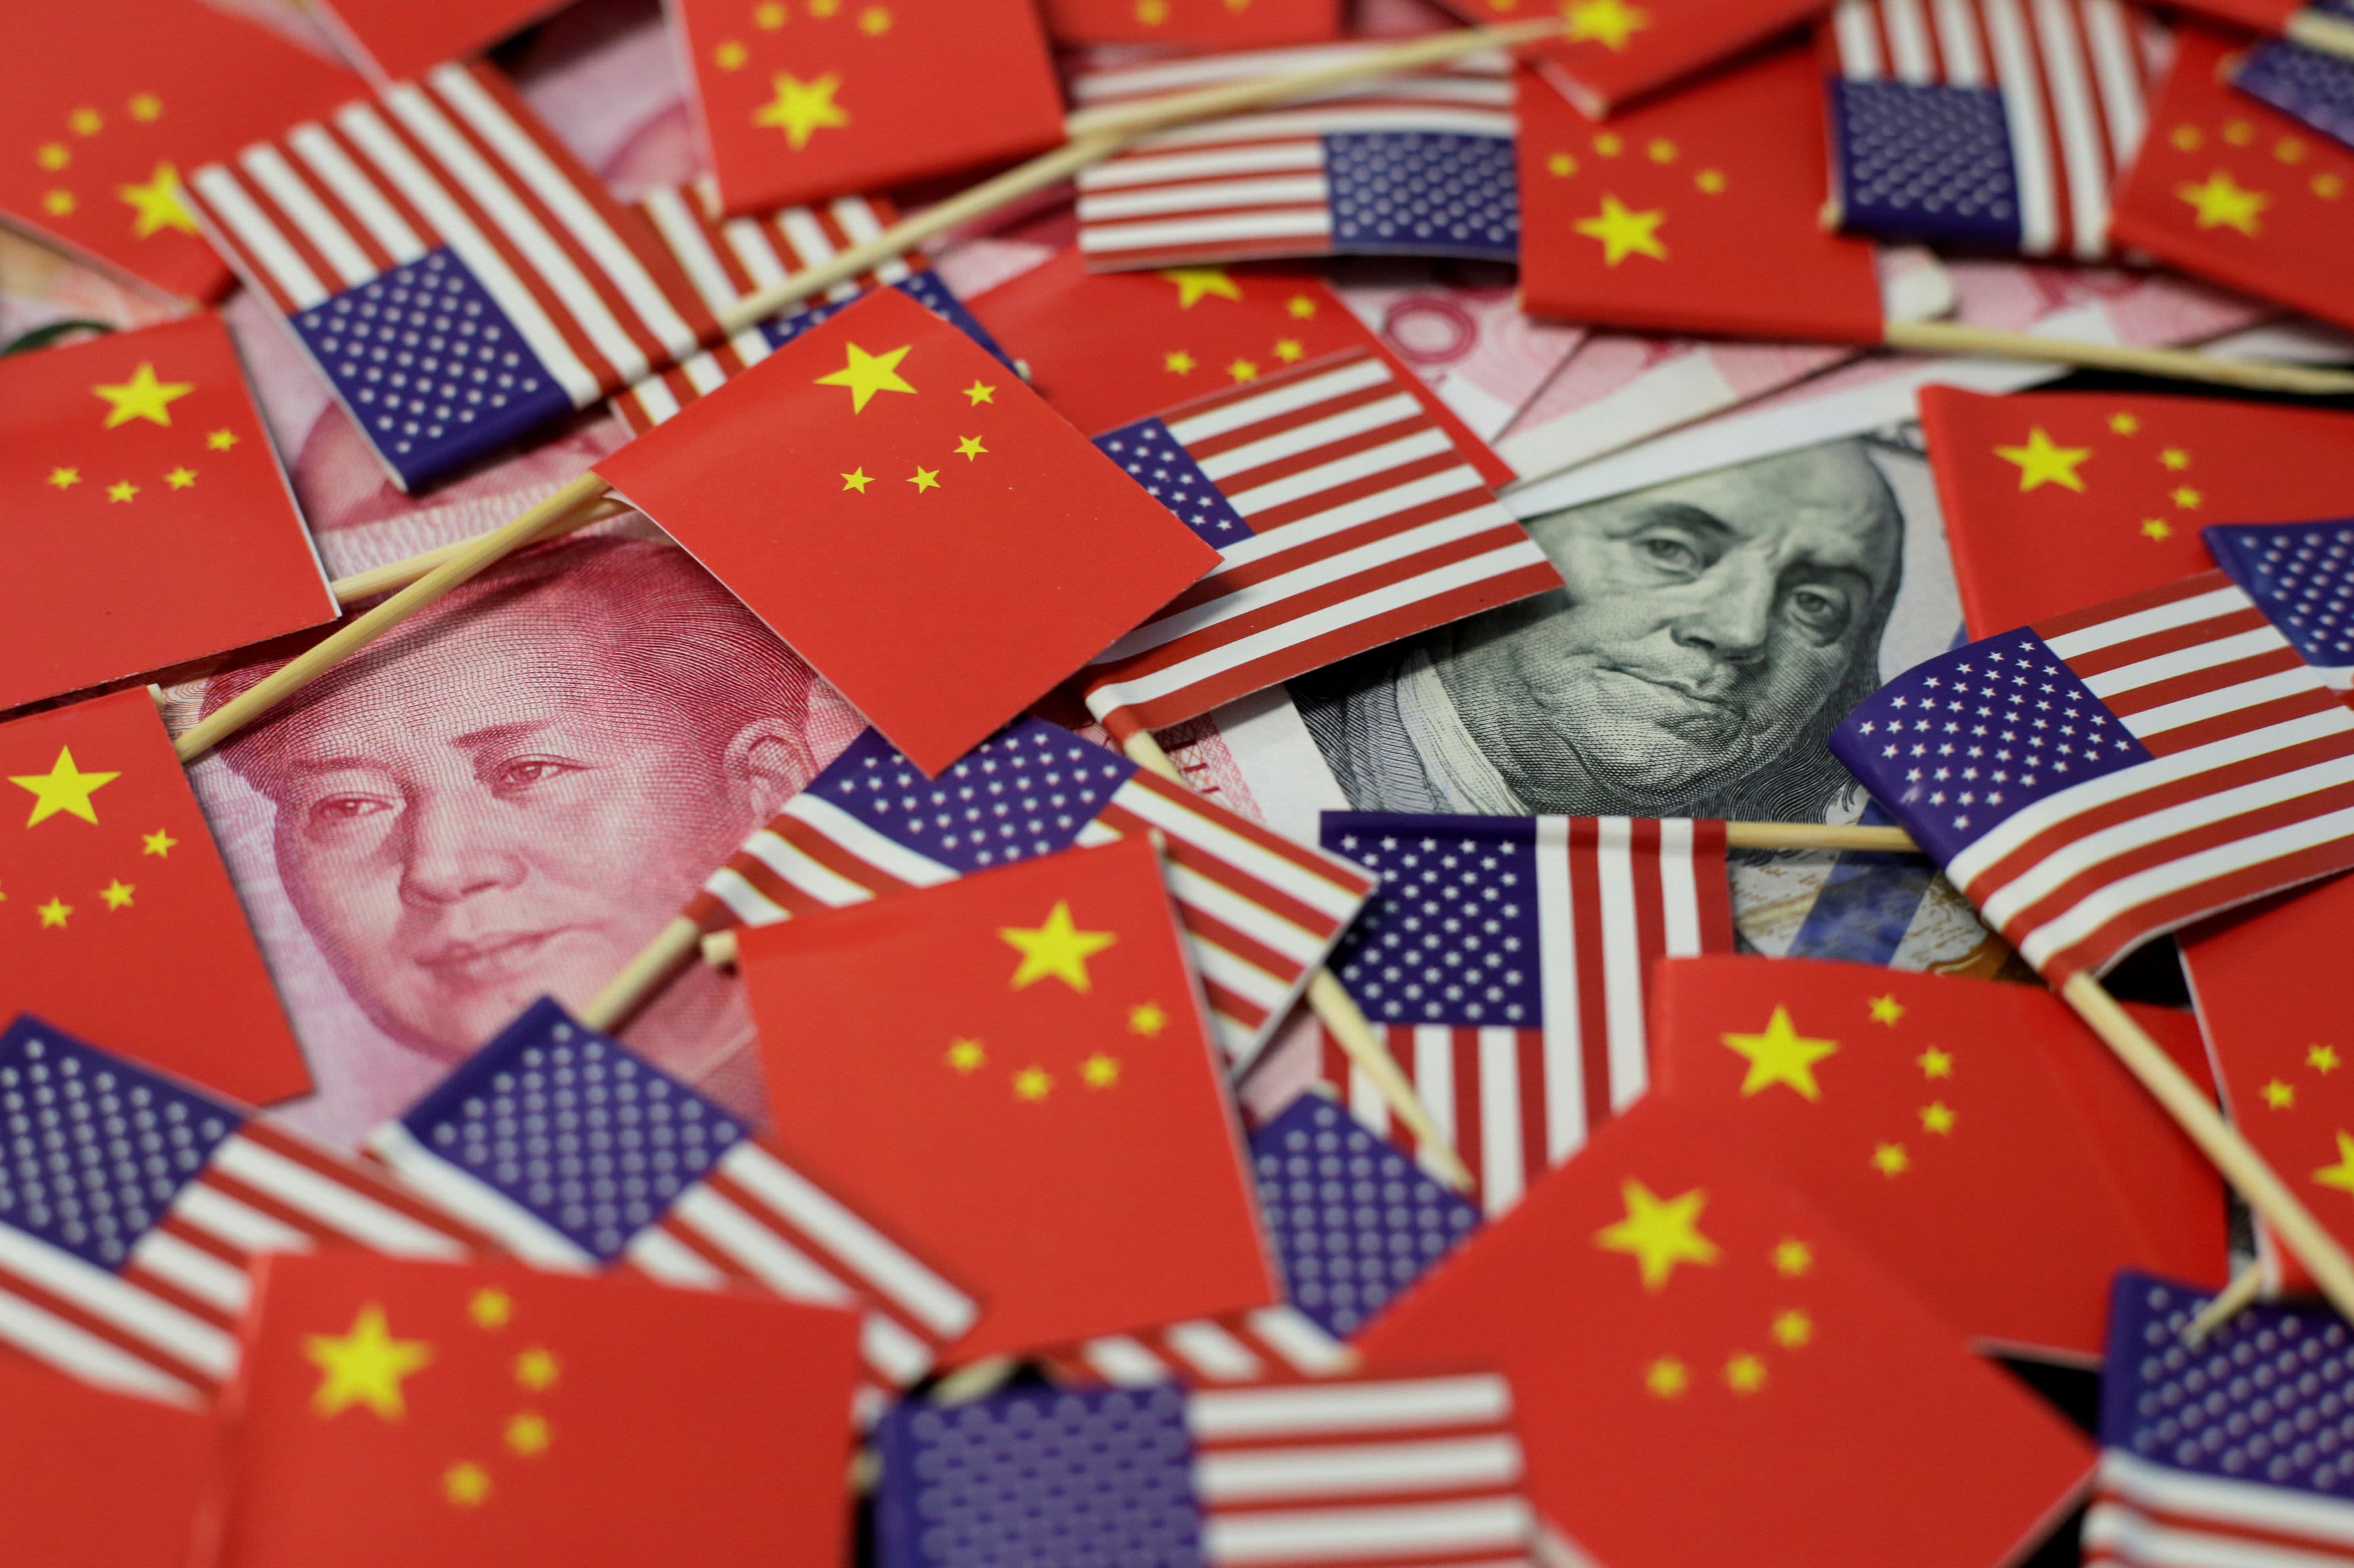 Investors throw more money at US equities against China: EPFR fund flow data